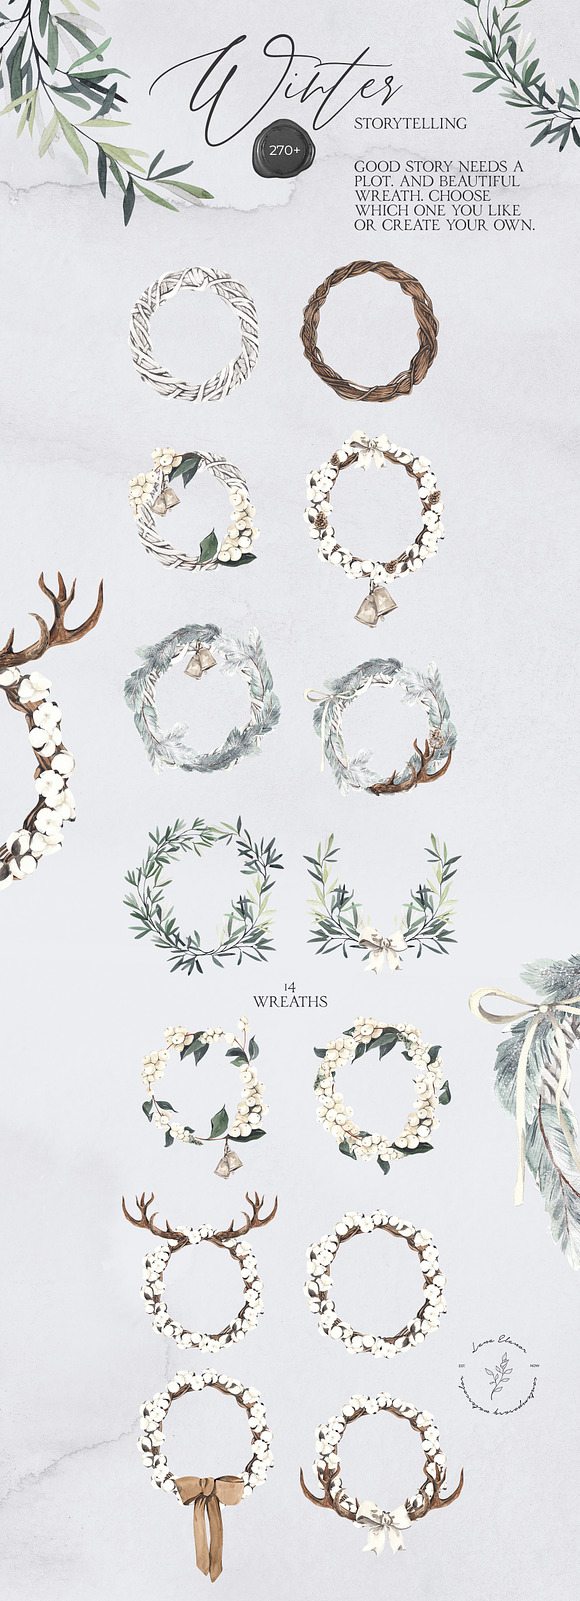 WINTER STORYTELLING Christmas set in Illustrations - product preview 12